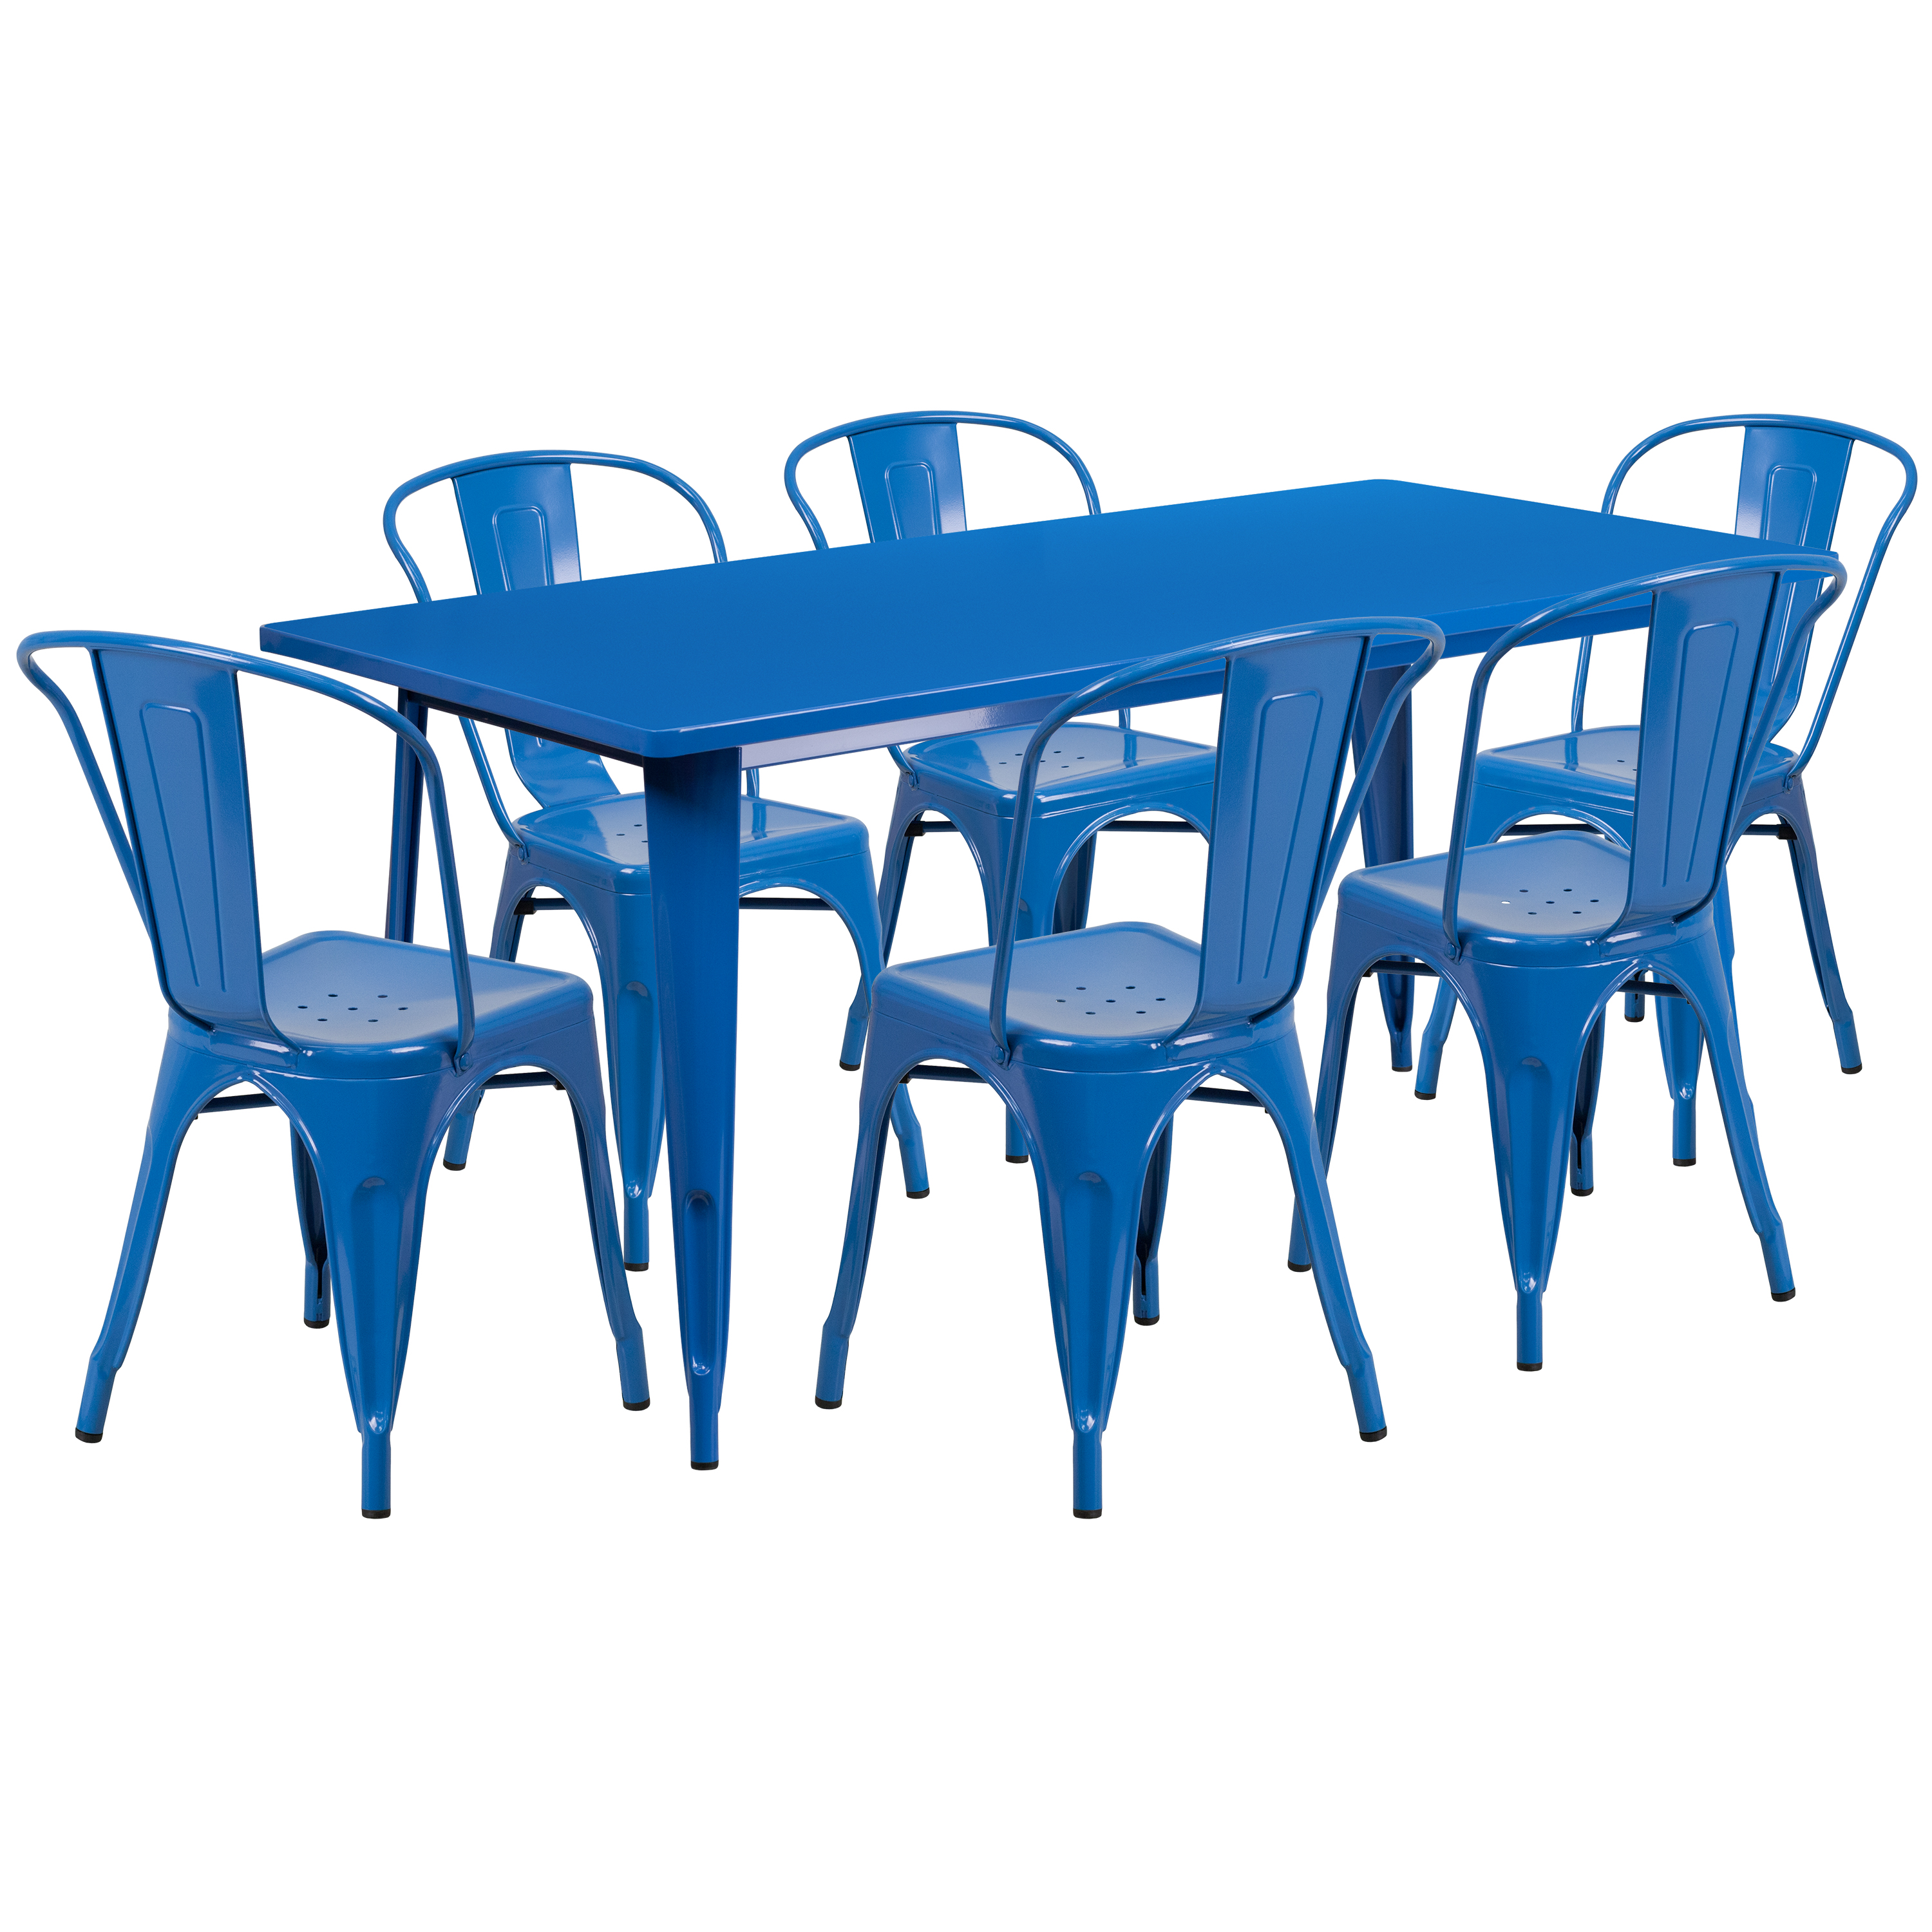 Flash Furniture Gilbert Commercial Grade 31.5" x 63" Rectangular Blue Metal Indoor-Outdoor Table Set with 6 Stack Chairs - image 1 of 5